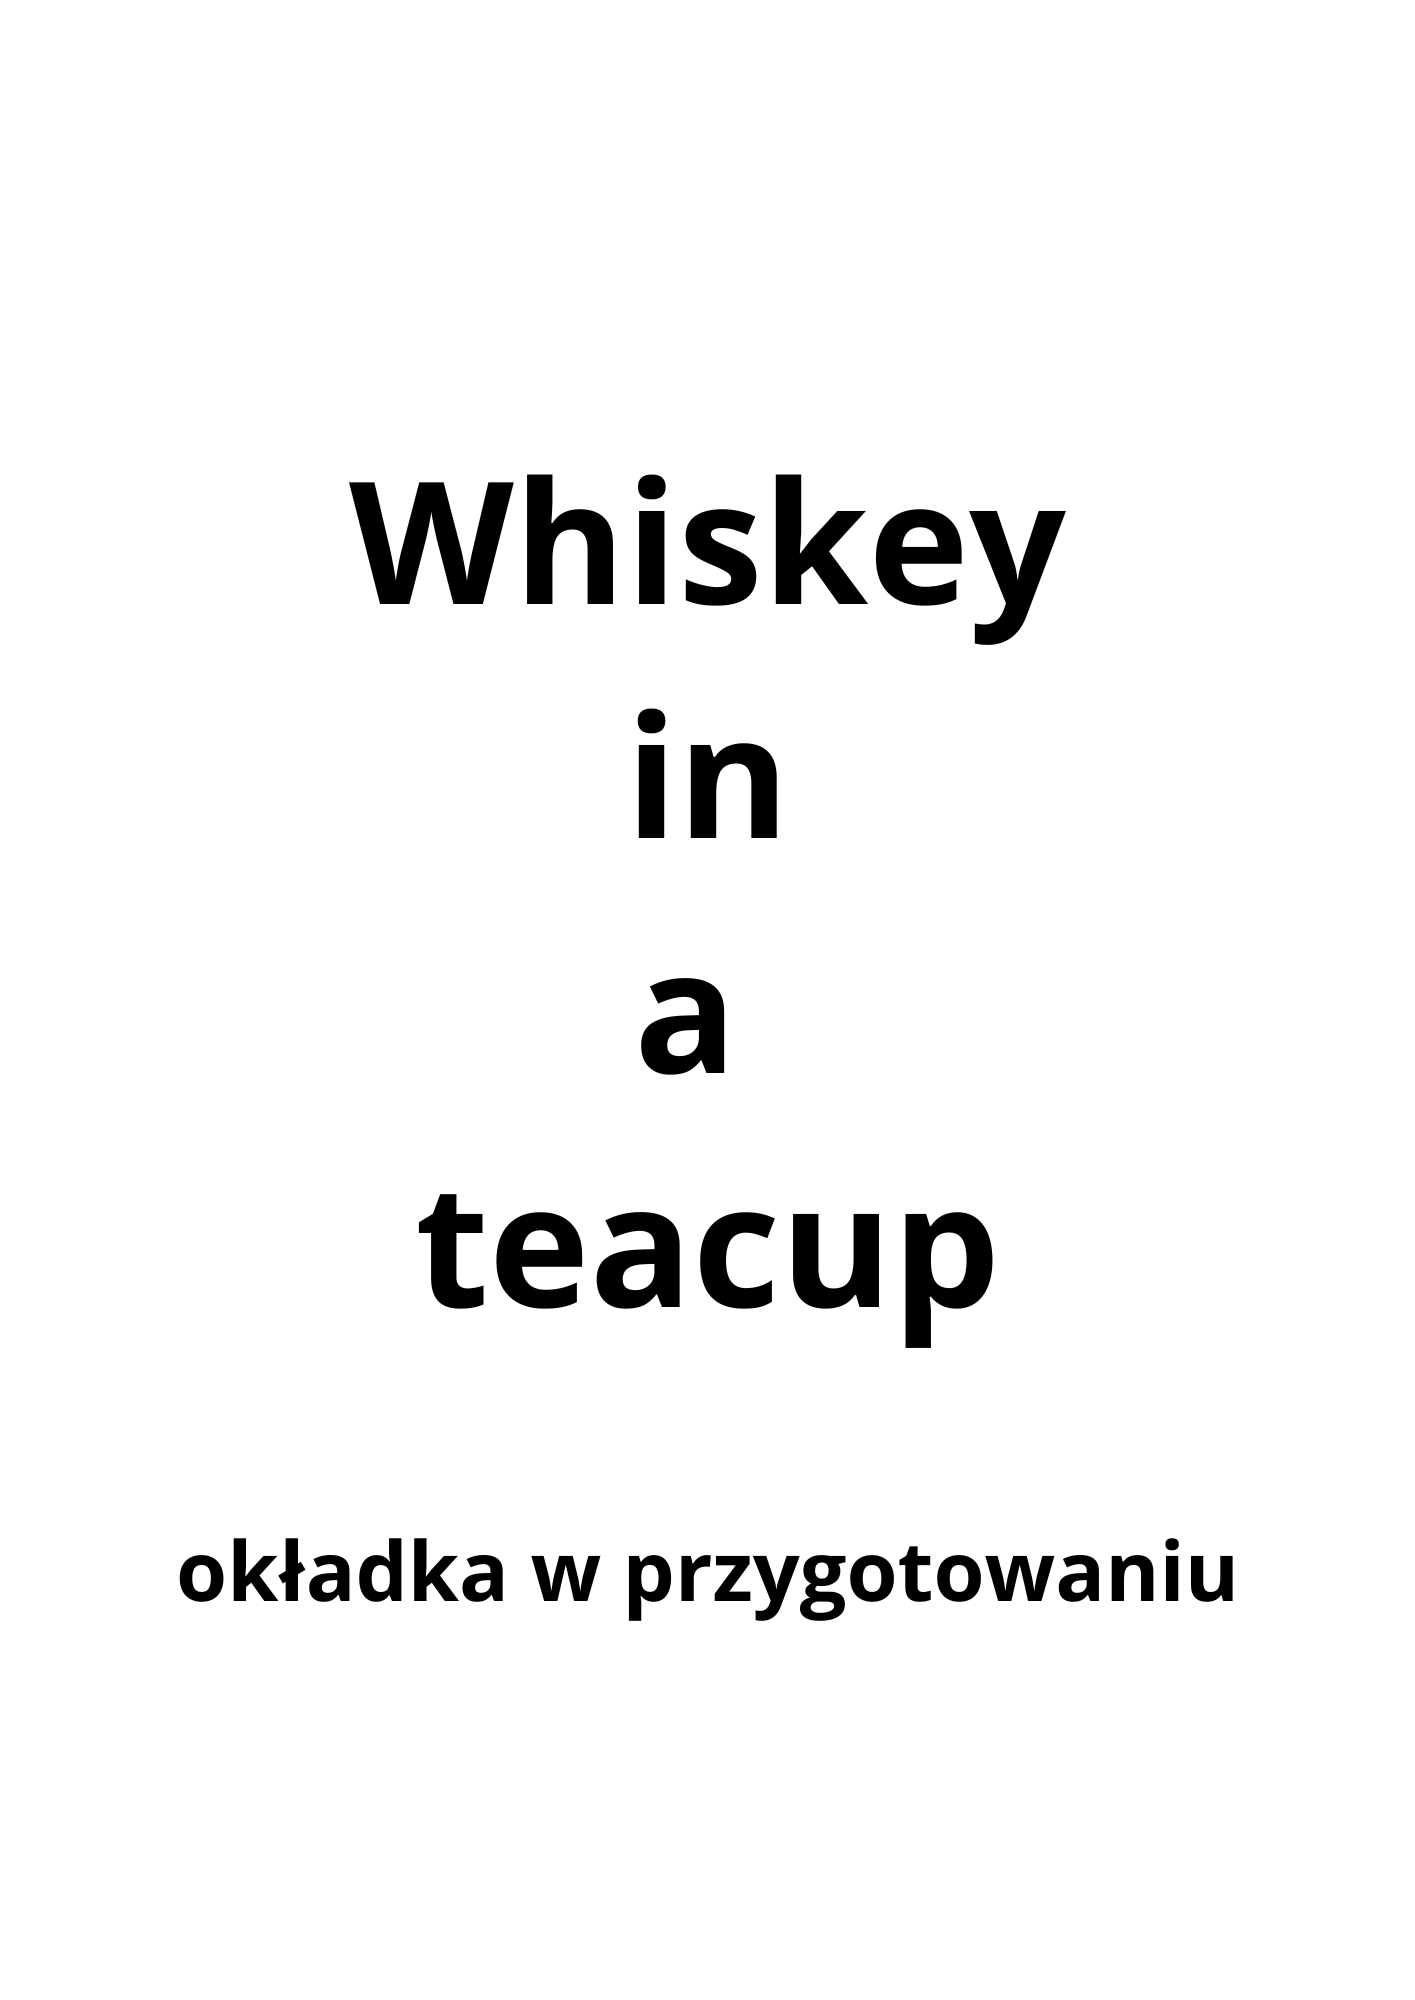 Whiskey in a teacup